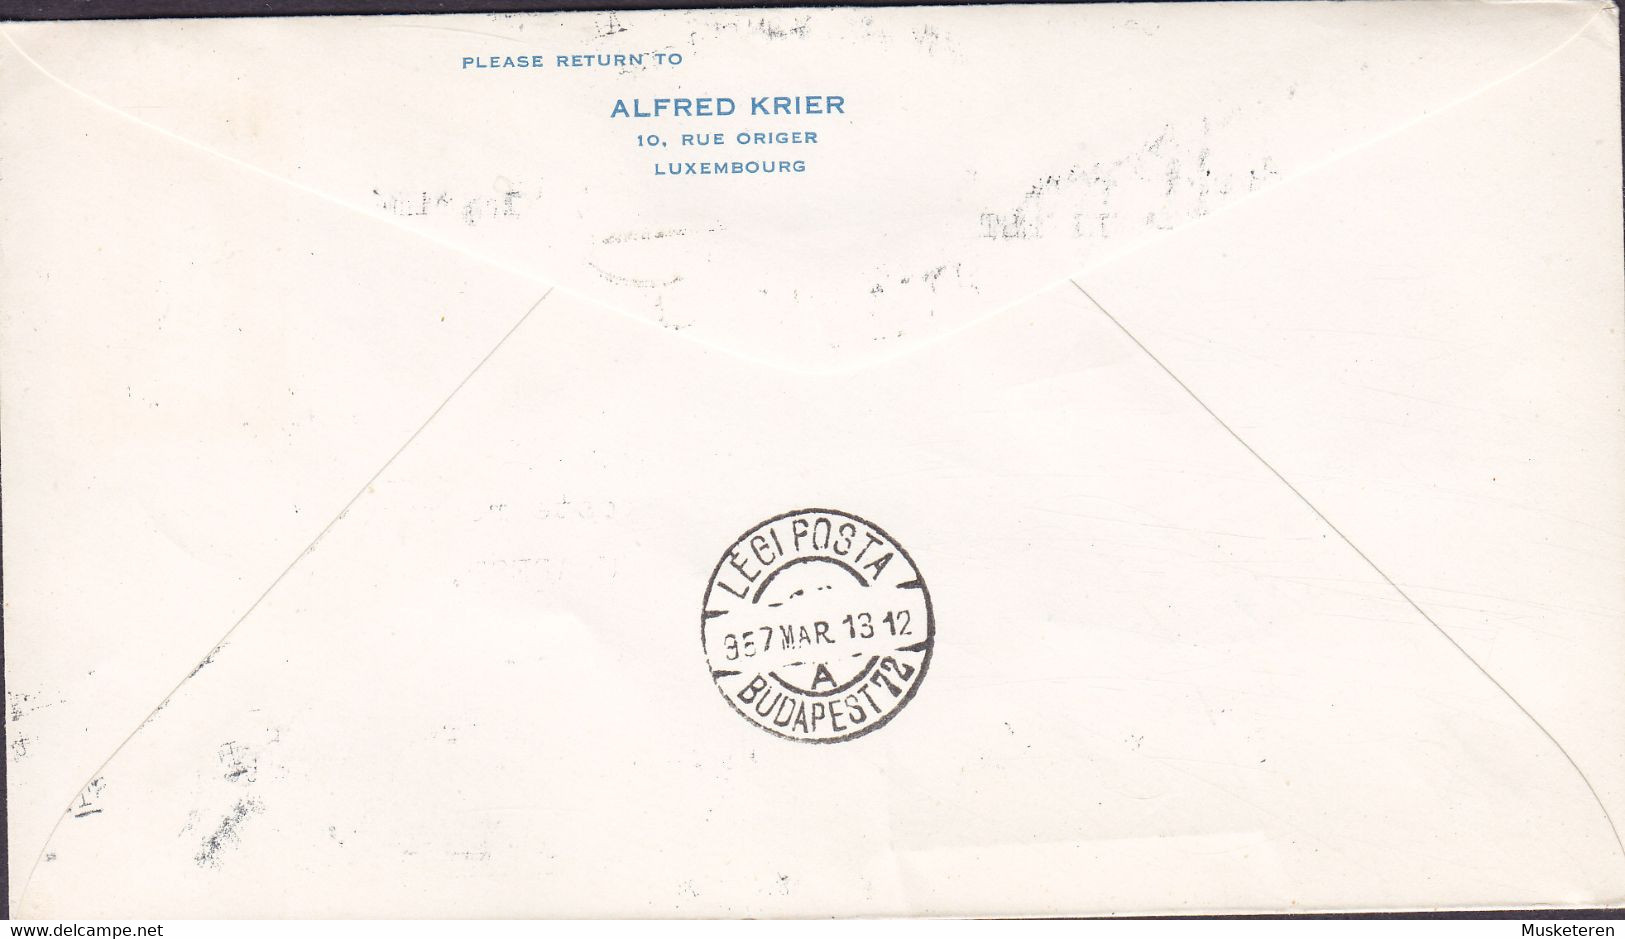 Luxembourg SABENA First Flight Premier Vol Postal BRUXELLES-BUDAPEST, LUXEMBOURG-VILLE 1957 Cover Brief Europa CEPT - Storia Postale